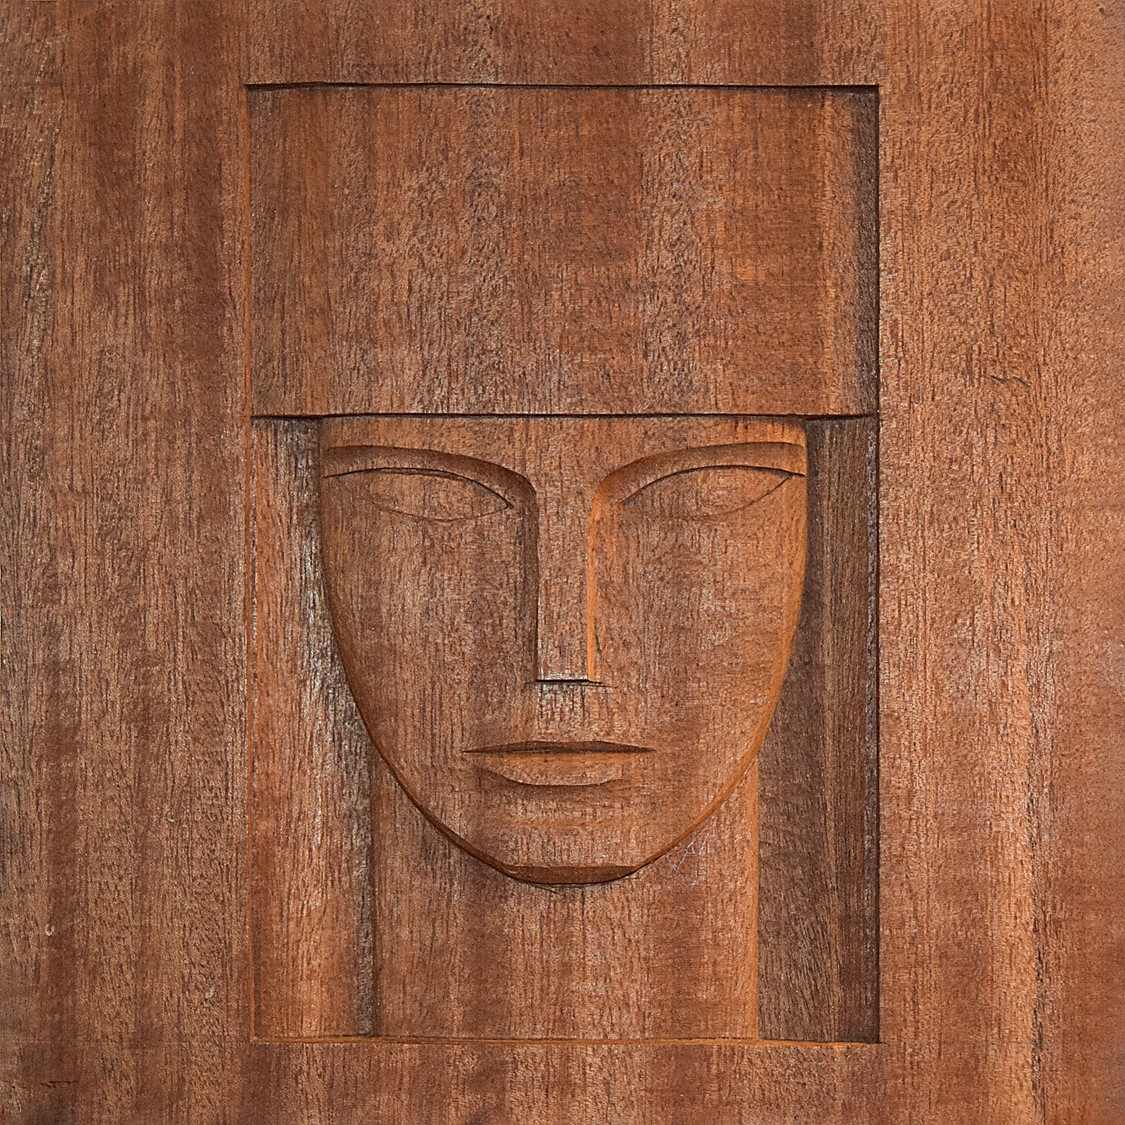 image of a carving in wood representing the head of a queen